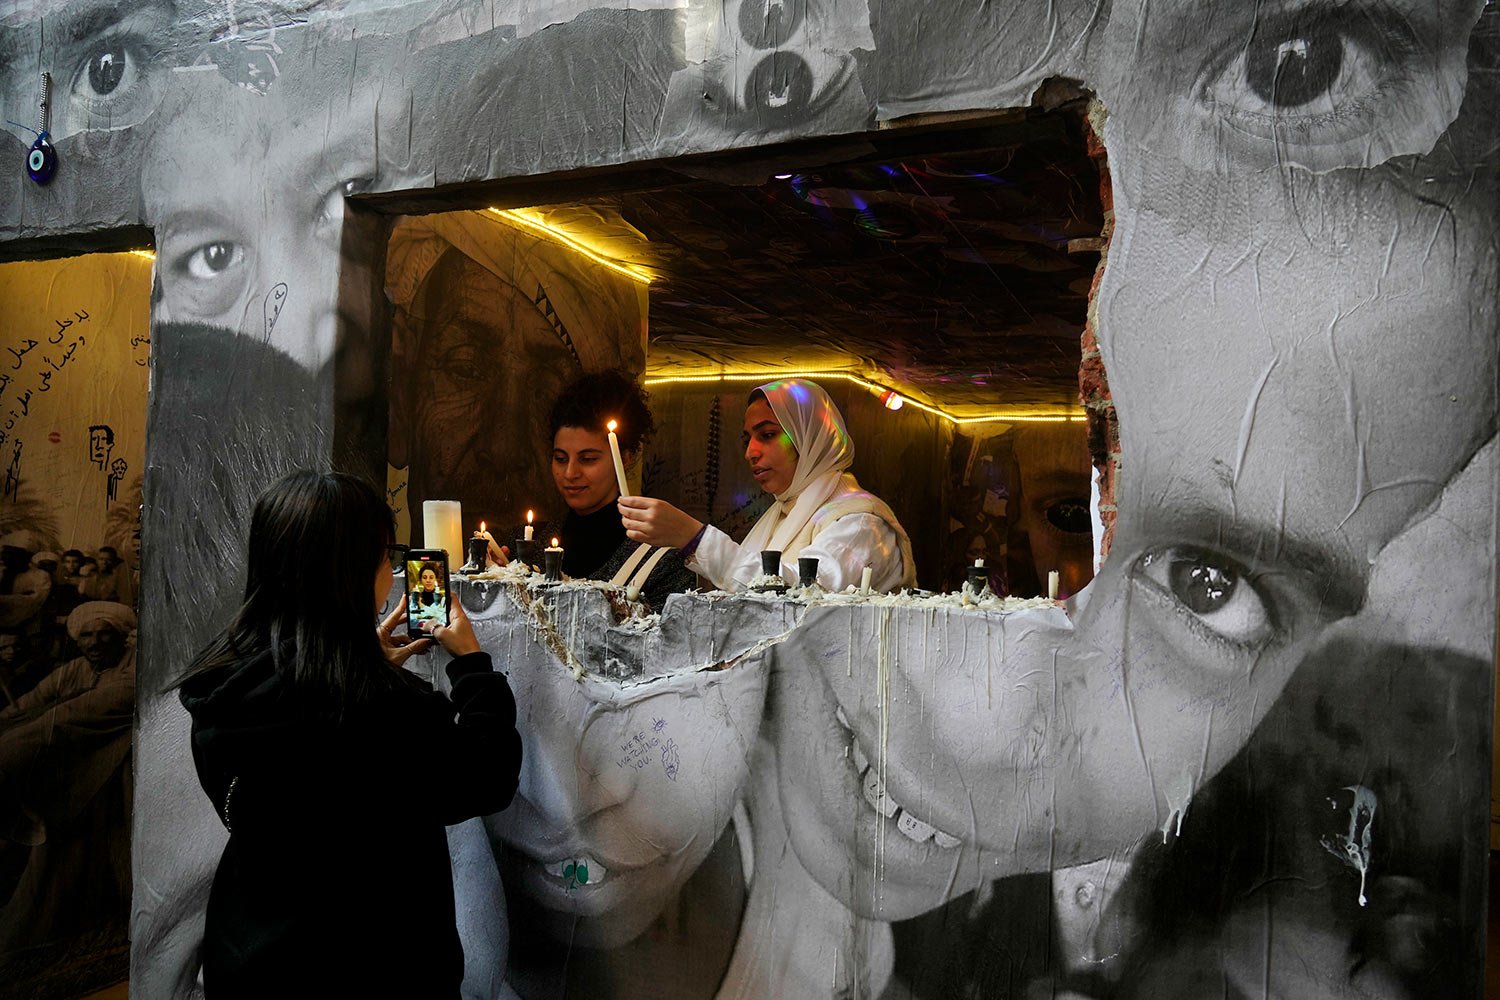  Visitors light candles at the art work "Communications" of Egyptian artist Mahmoud Hawary in downtown Cairo, Egypt, Saturday, Feb. 18, 2023. (AP Photo/Amr Nabil) 